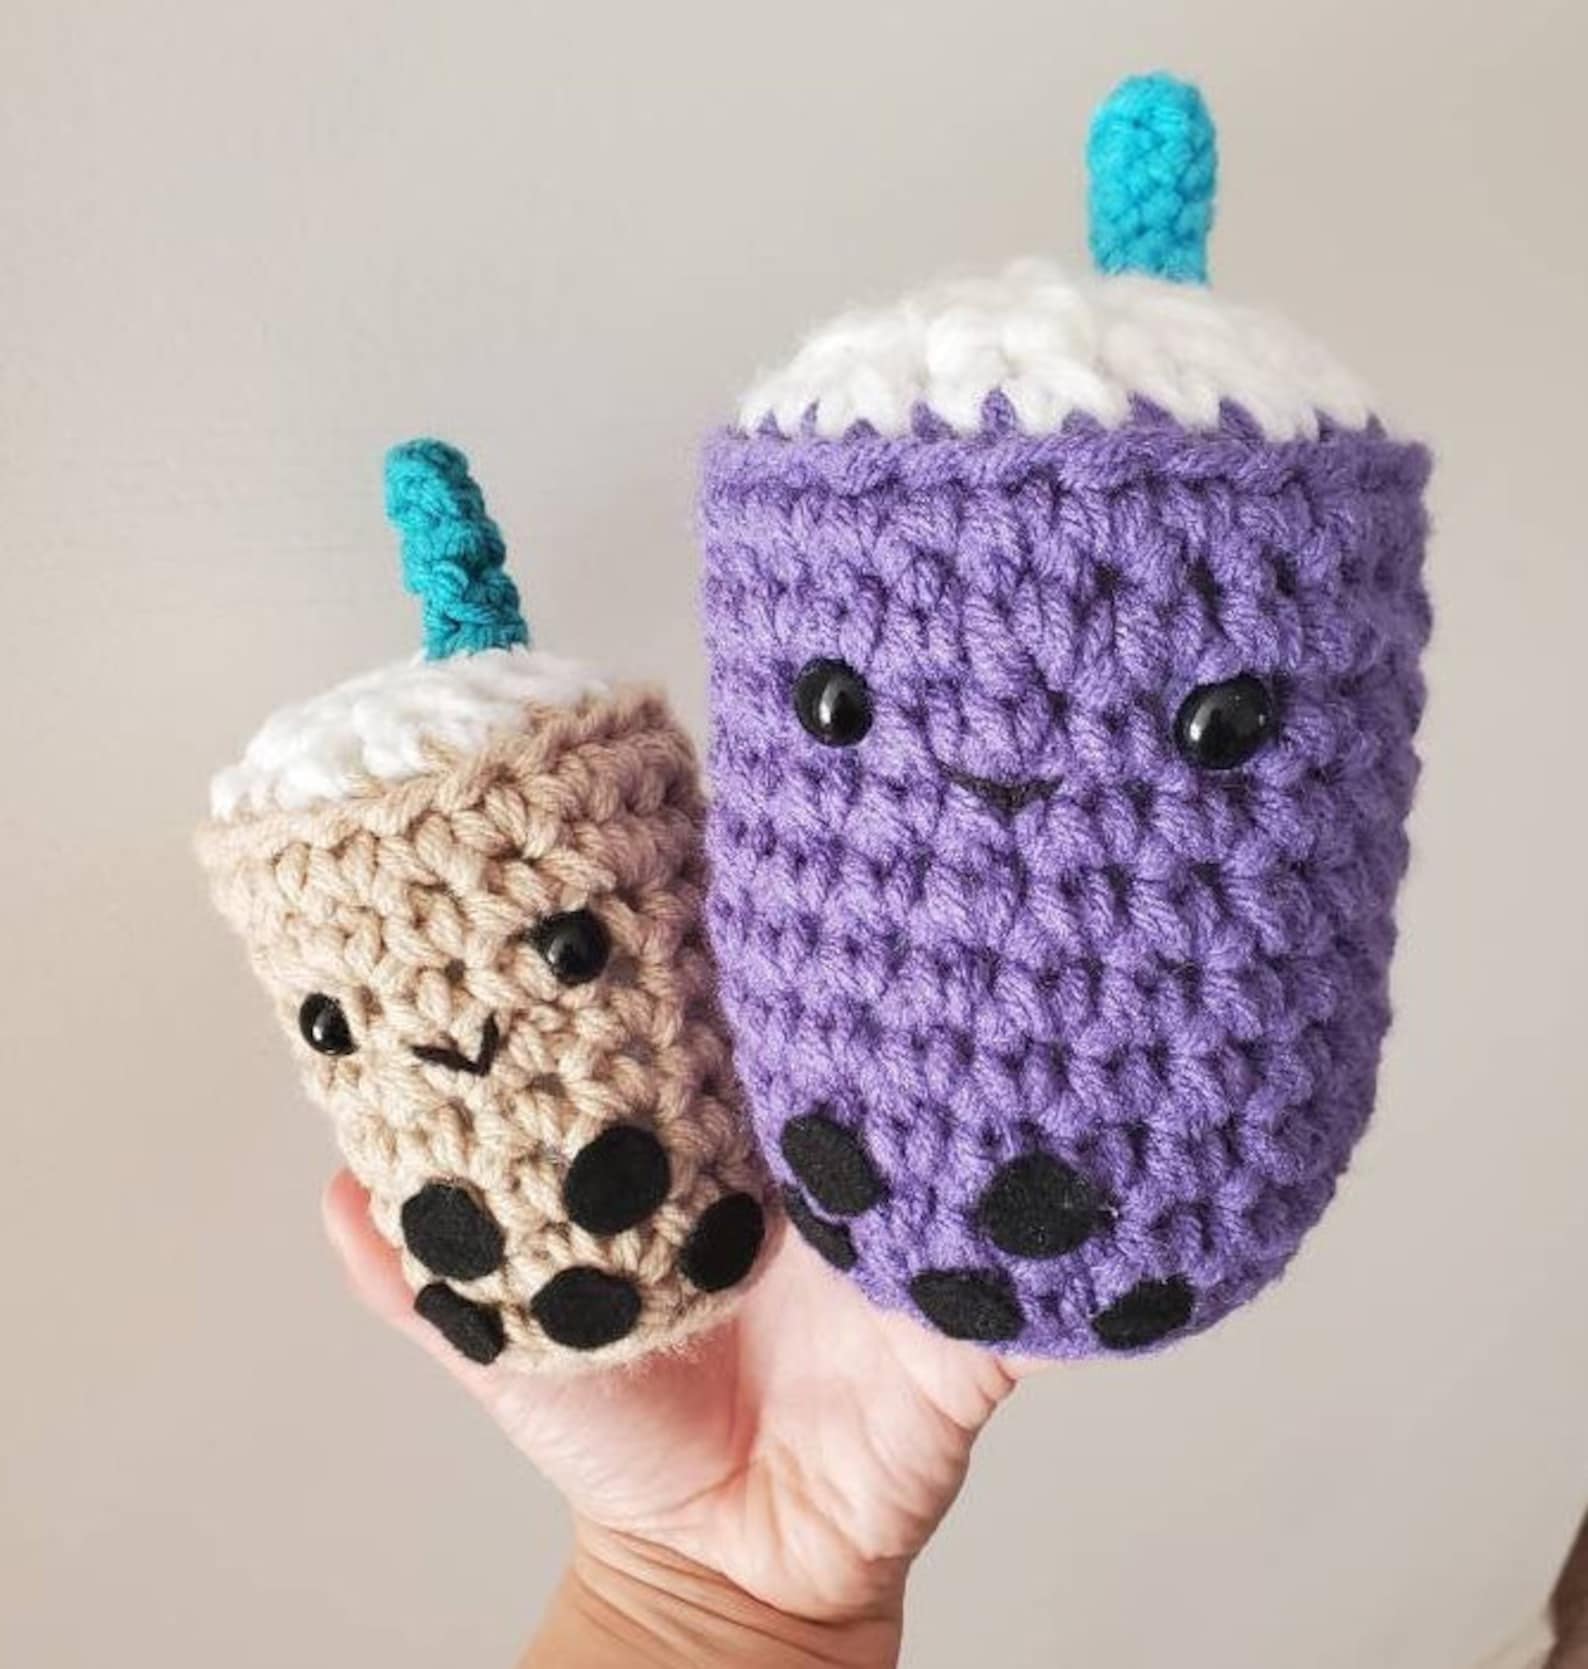 25 Boba Goodies Under $25 By Asian-Owned Businesses